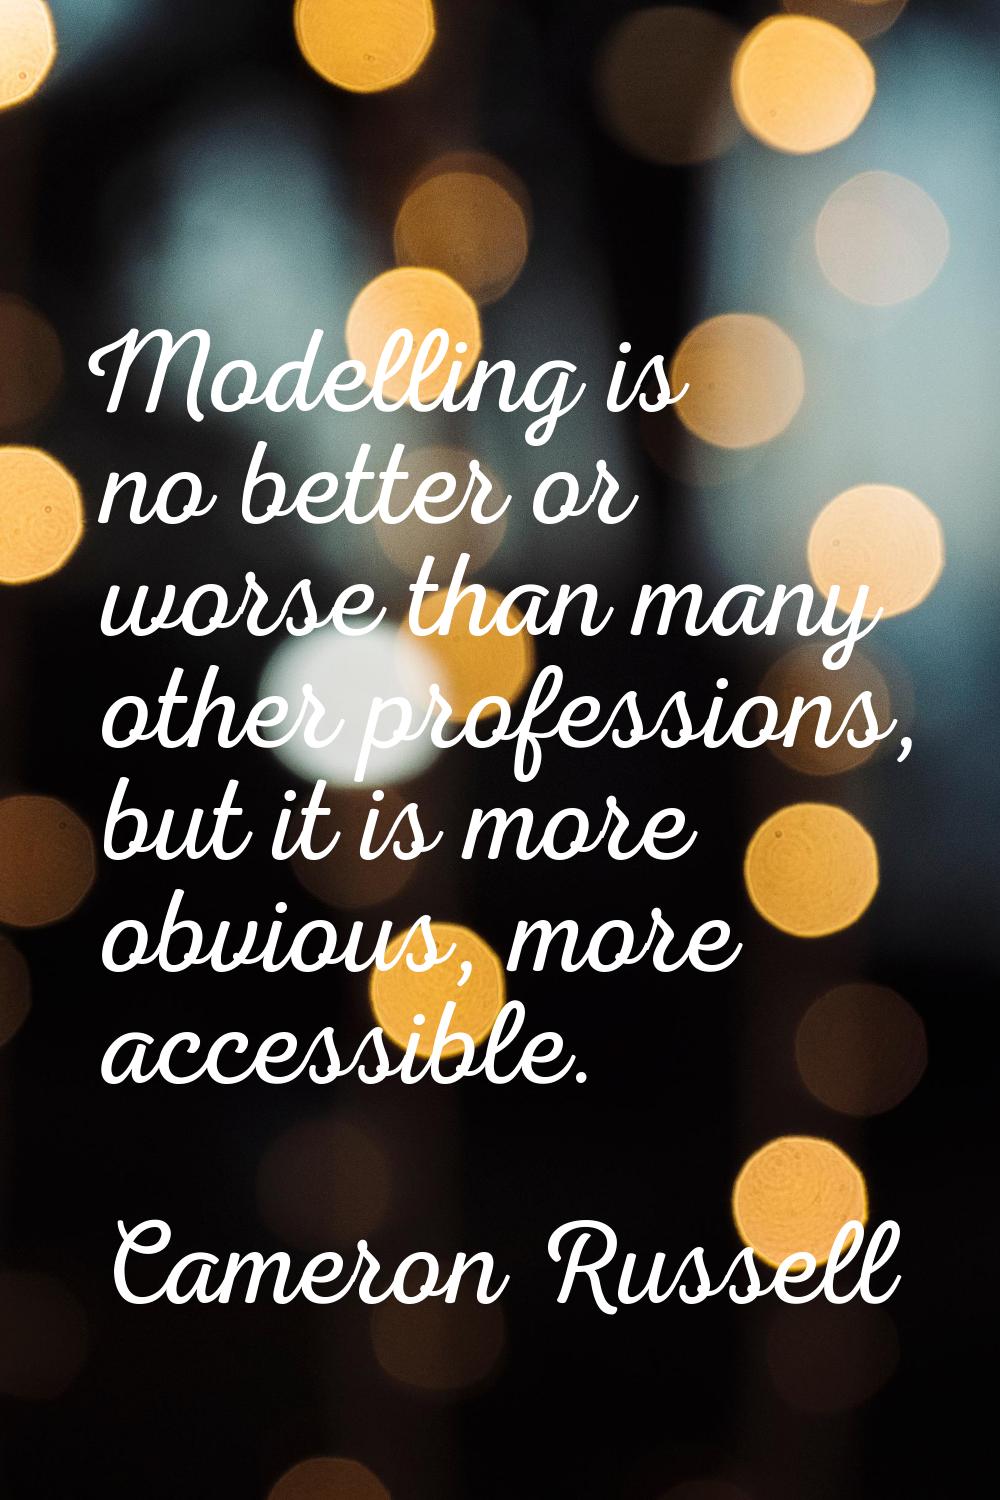 Modelling is no better or worse than many other professions, but it is more obvious, more accessibl